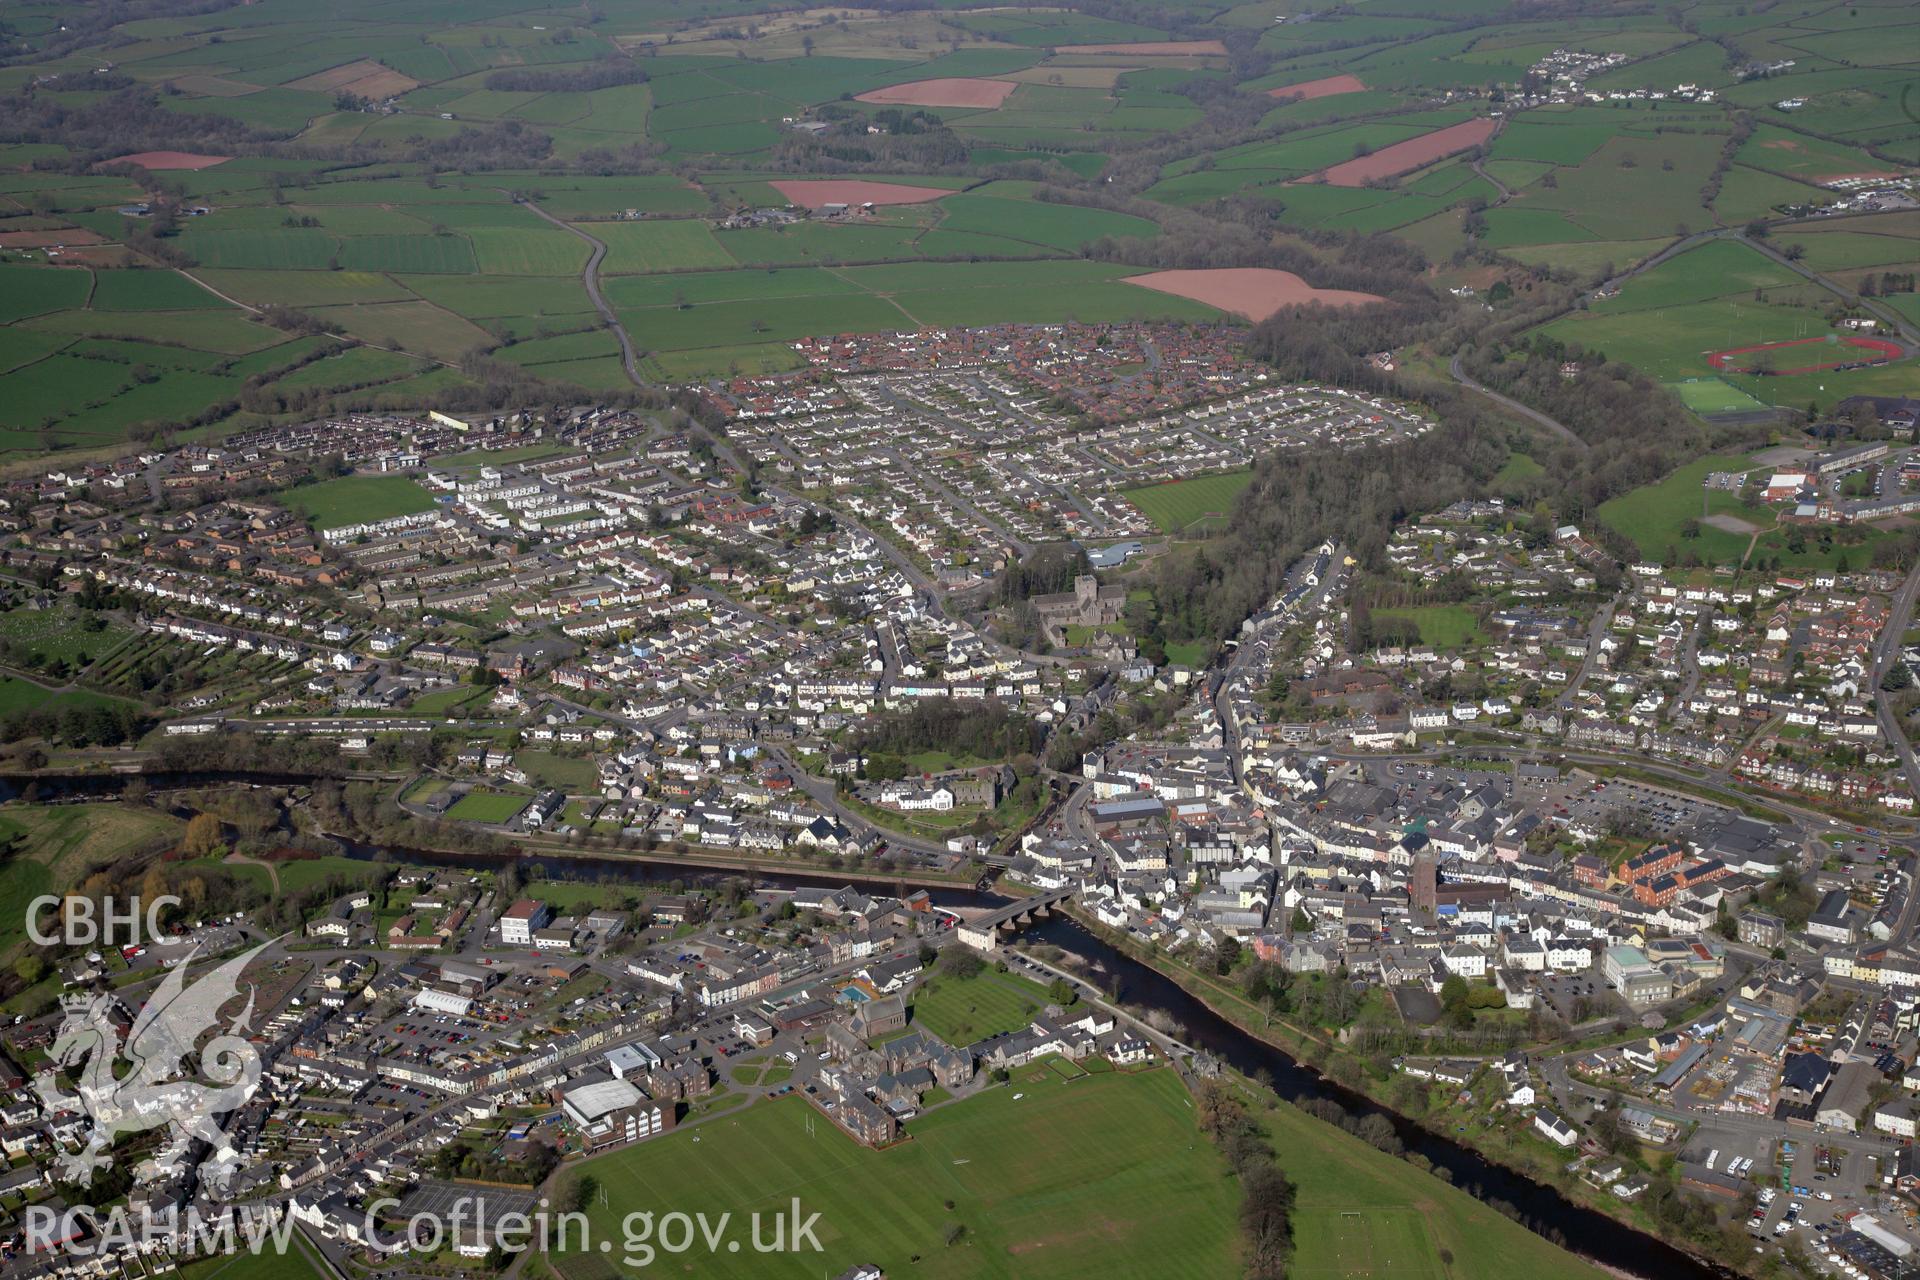 RCAHMW colour oblique photograph of Brecon town. Taken by Toby Driver and Oliver Davies on 28/03/2012.